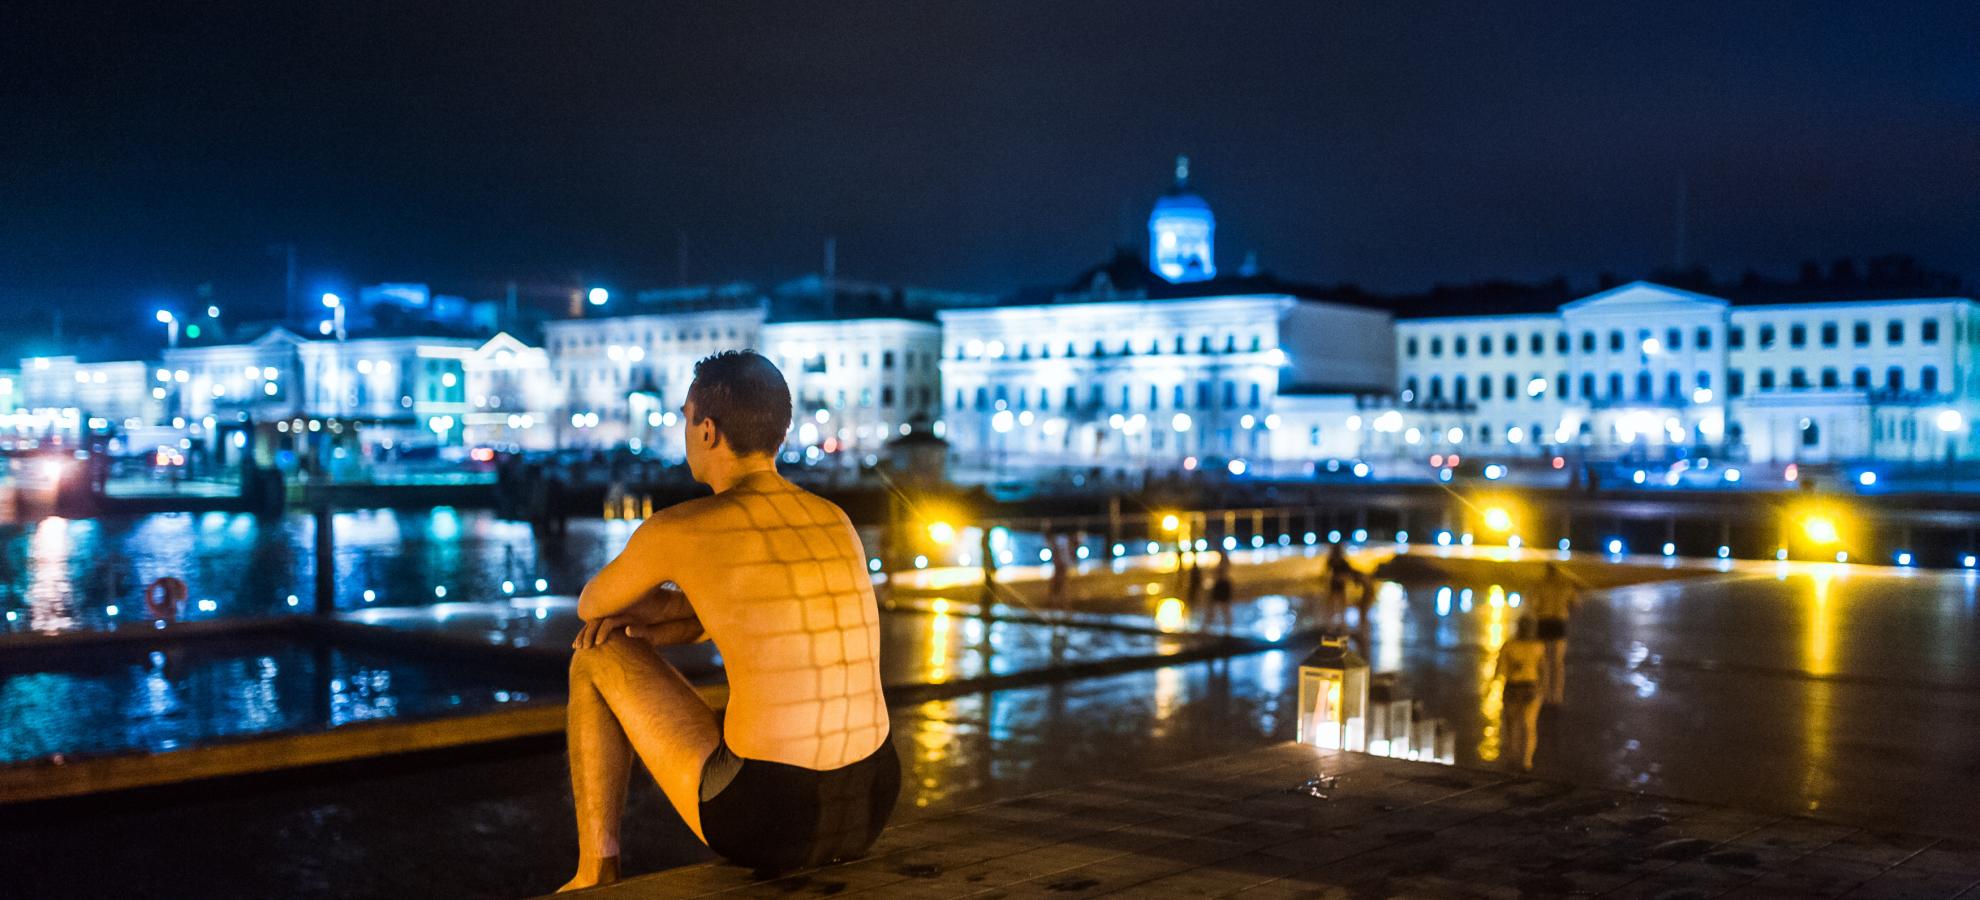 Sitting on the deck of Allas Sea Pool at night, the Predential Palace and the building of Pohjoisesplanadi lit up in the background, a man in swimming shorts looks out towards the harbour on the left.